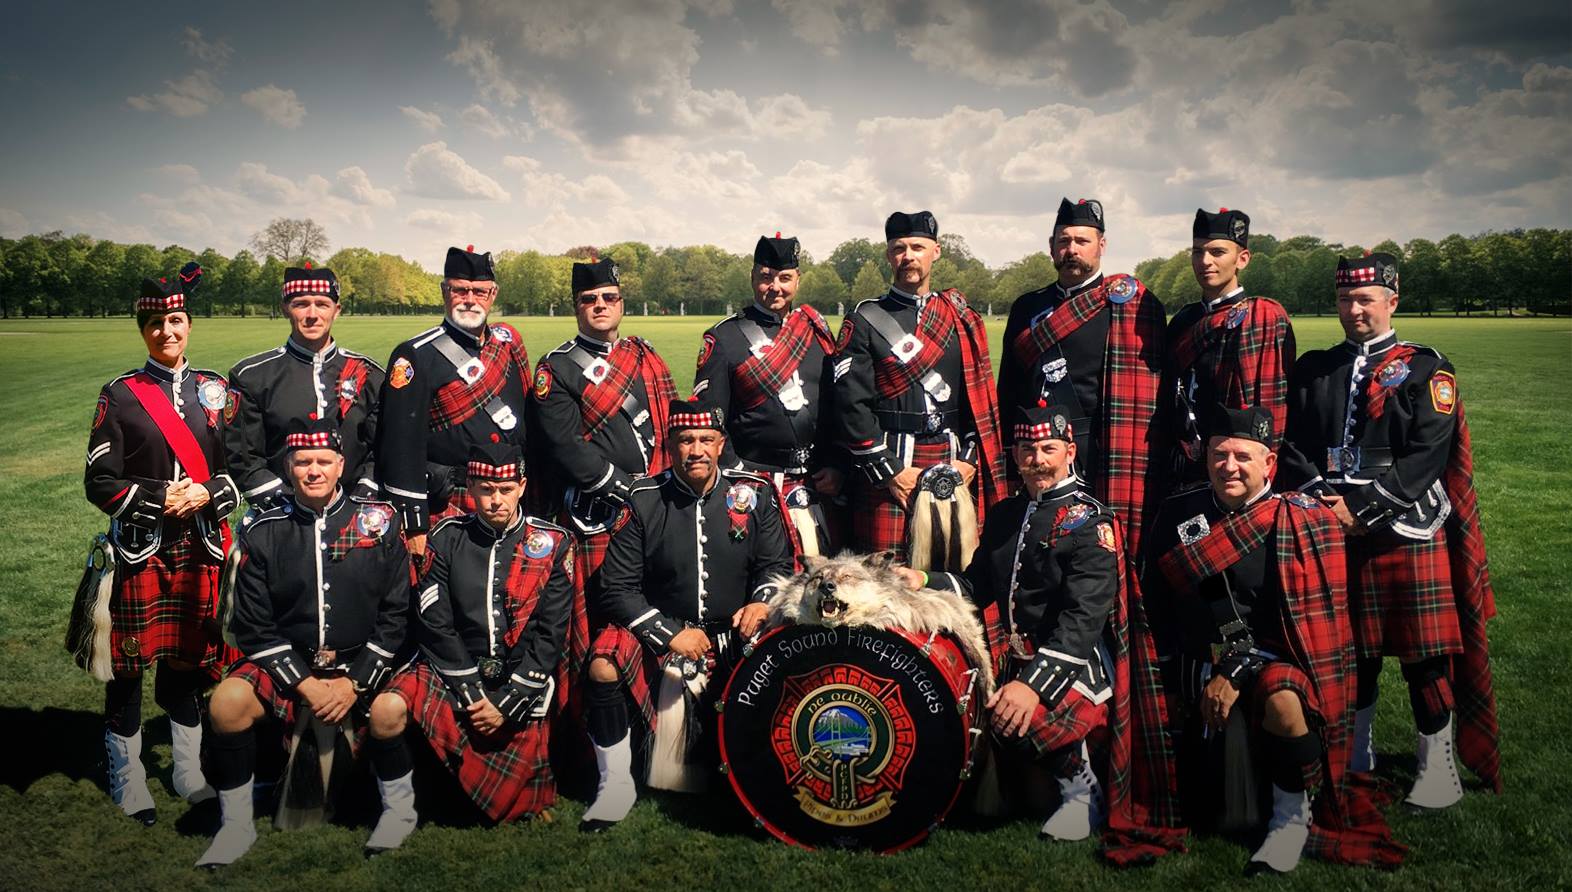 Pipes, Kilts & Fire Fighters